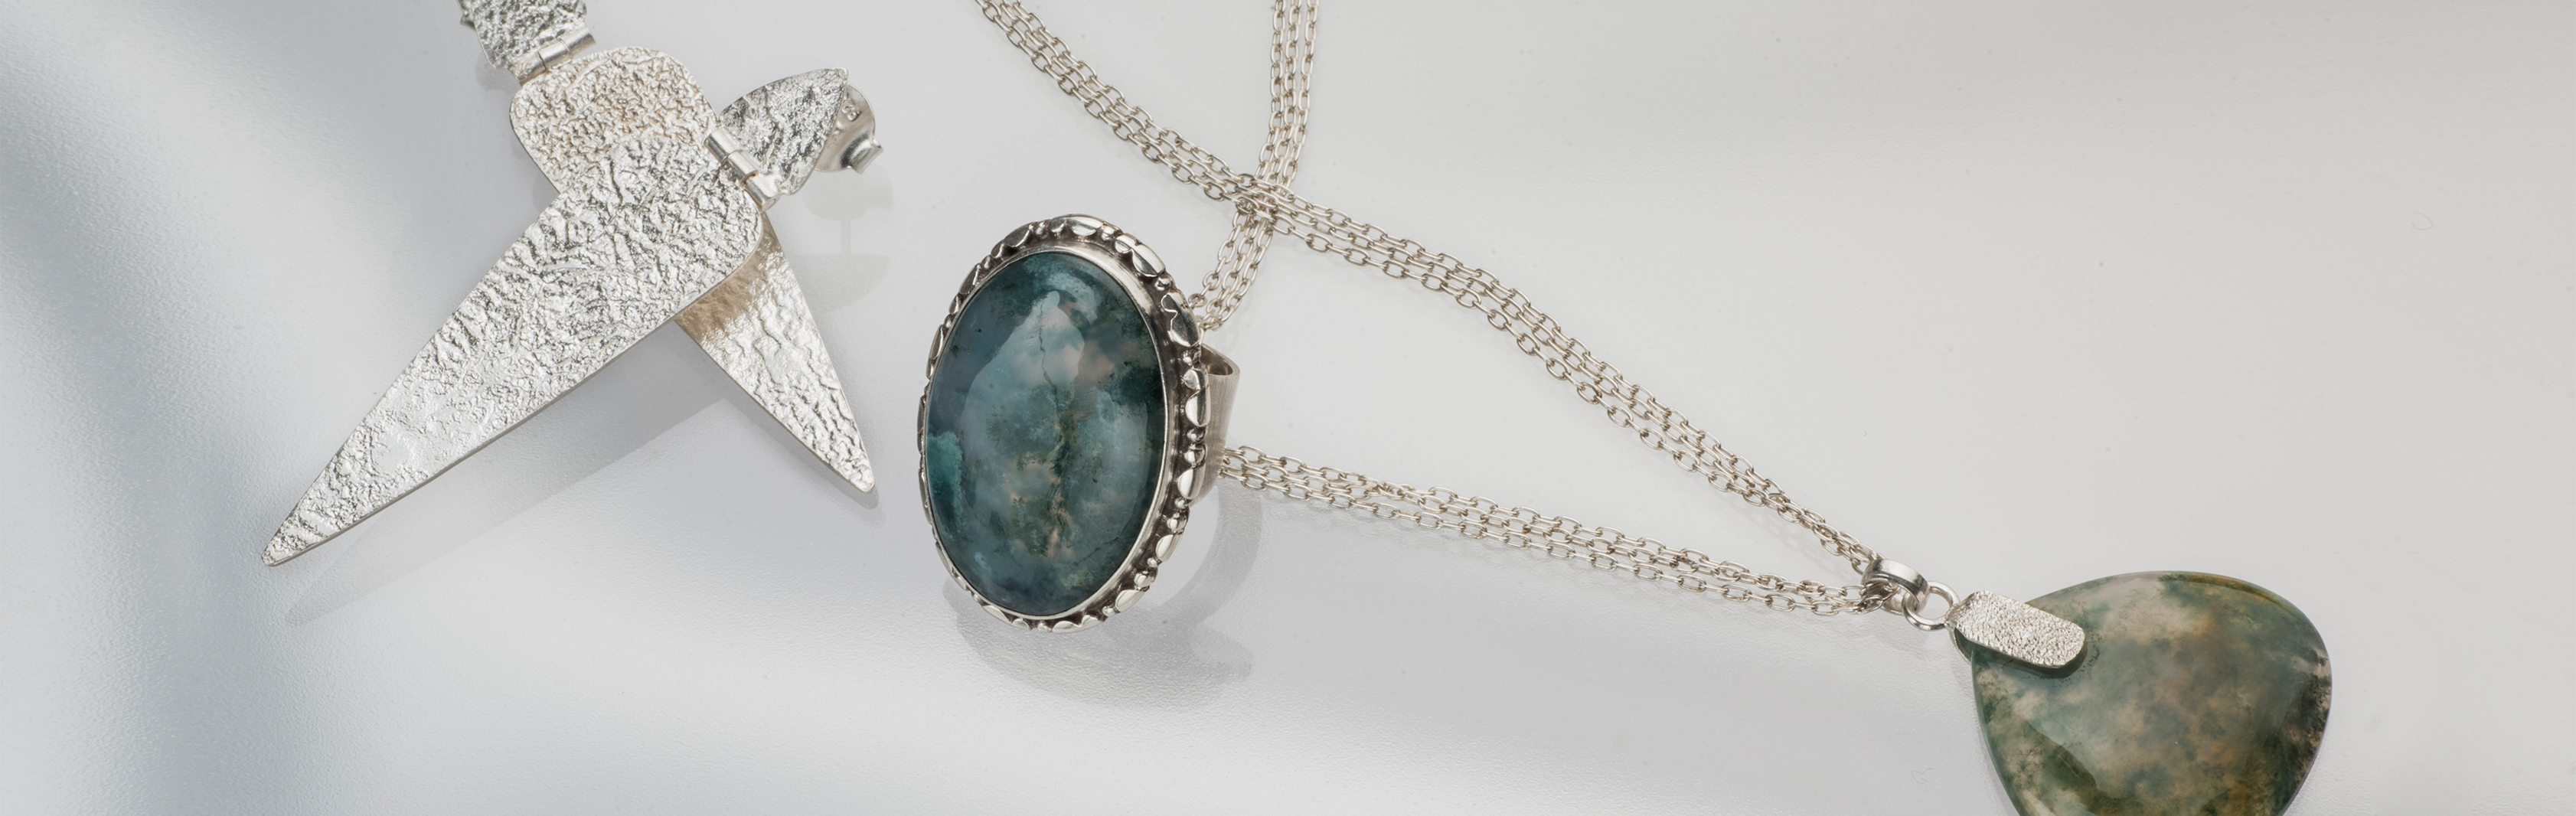 Black Sea Collection | 925 Sterling Silver Jewelry with Ocean Jasper, Labradorite, Moonstone and Agate